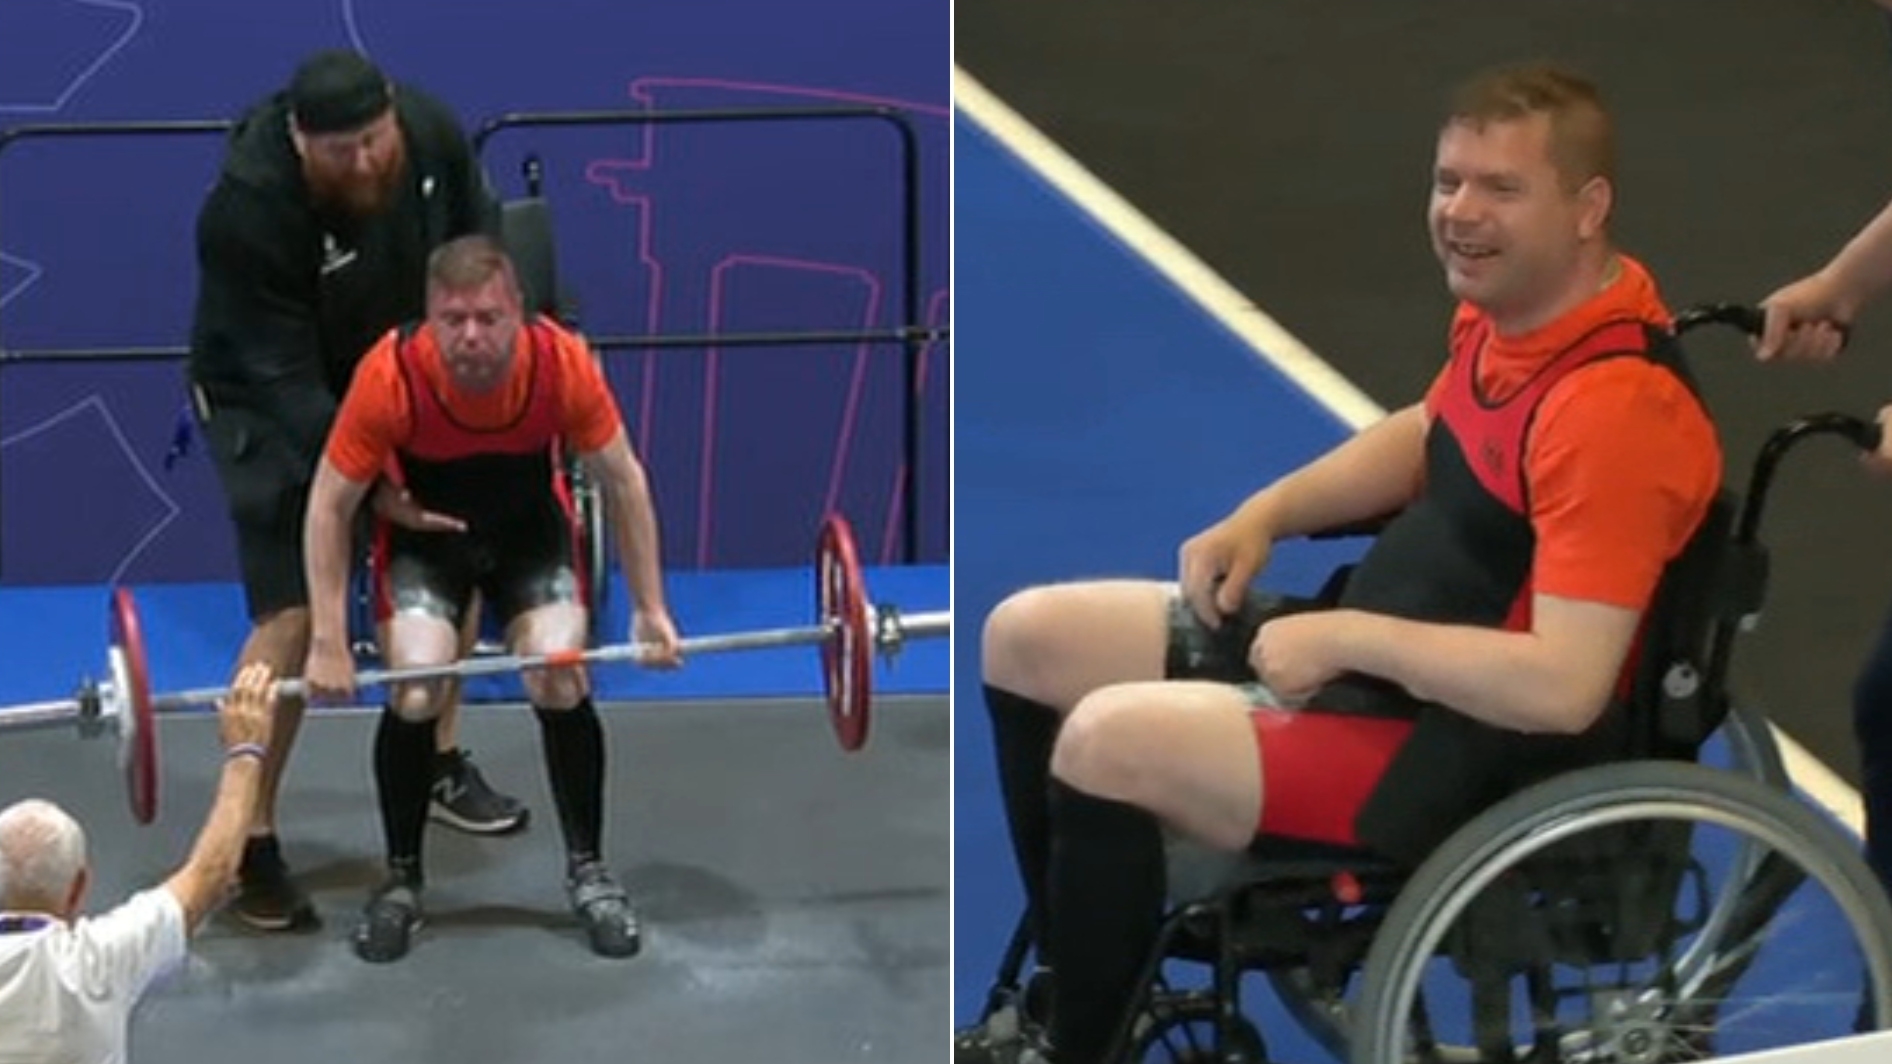 Olafsson forgoes his wheelchair in weightlifting heroics